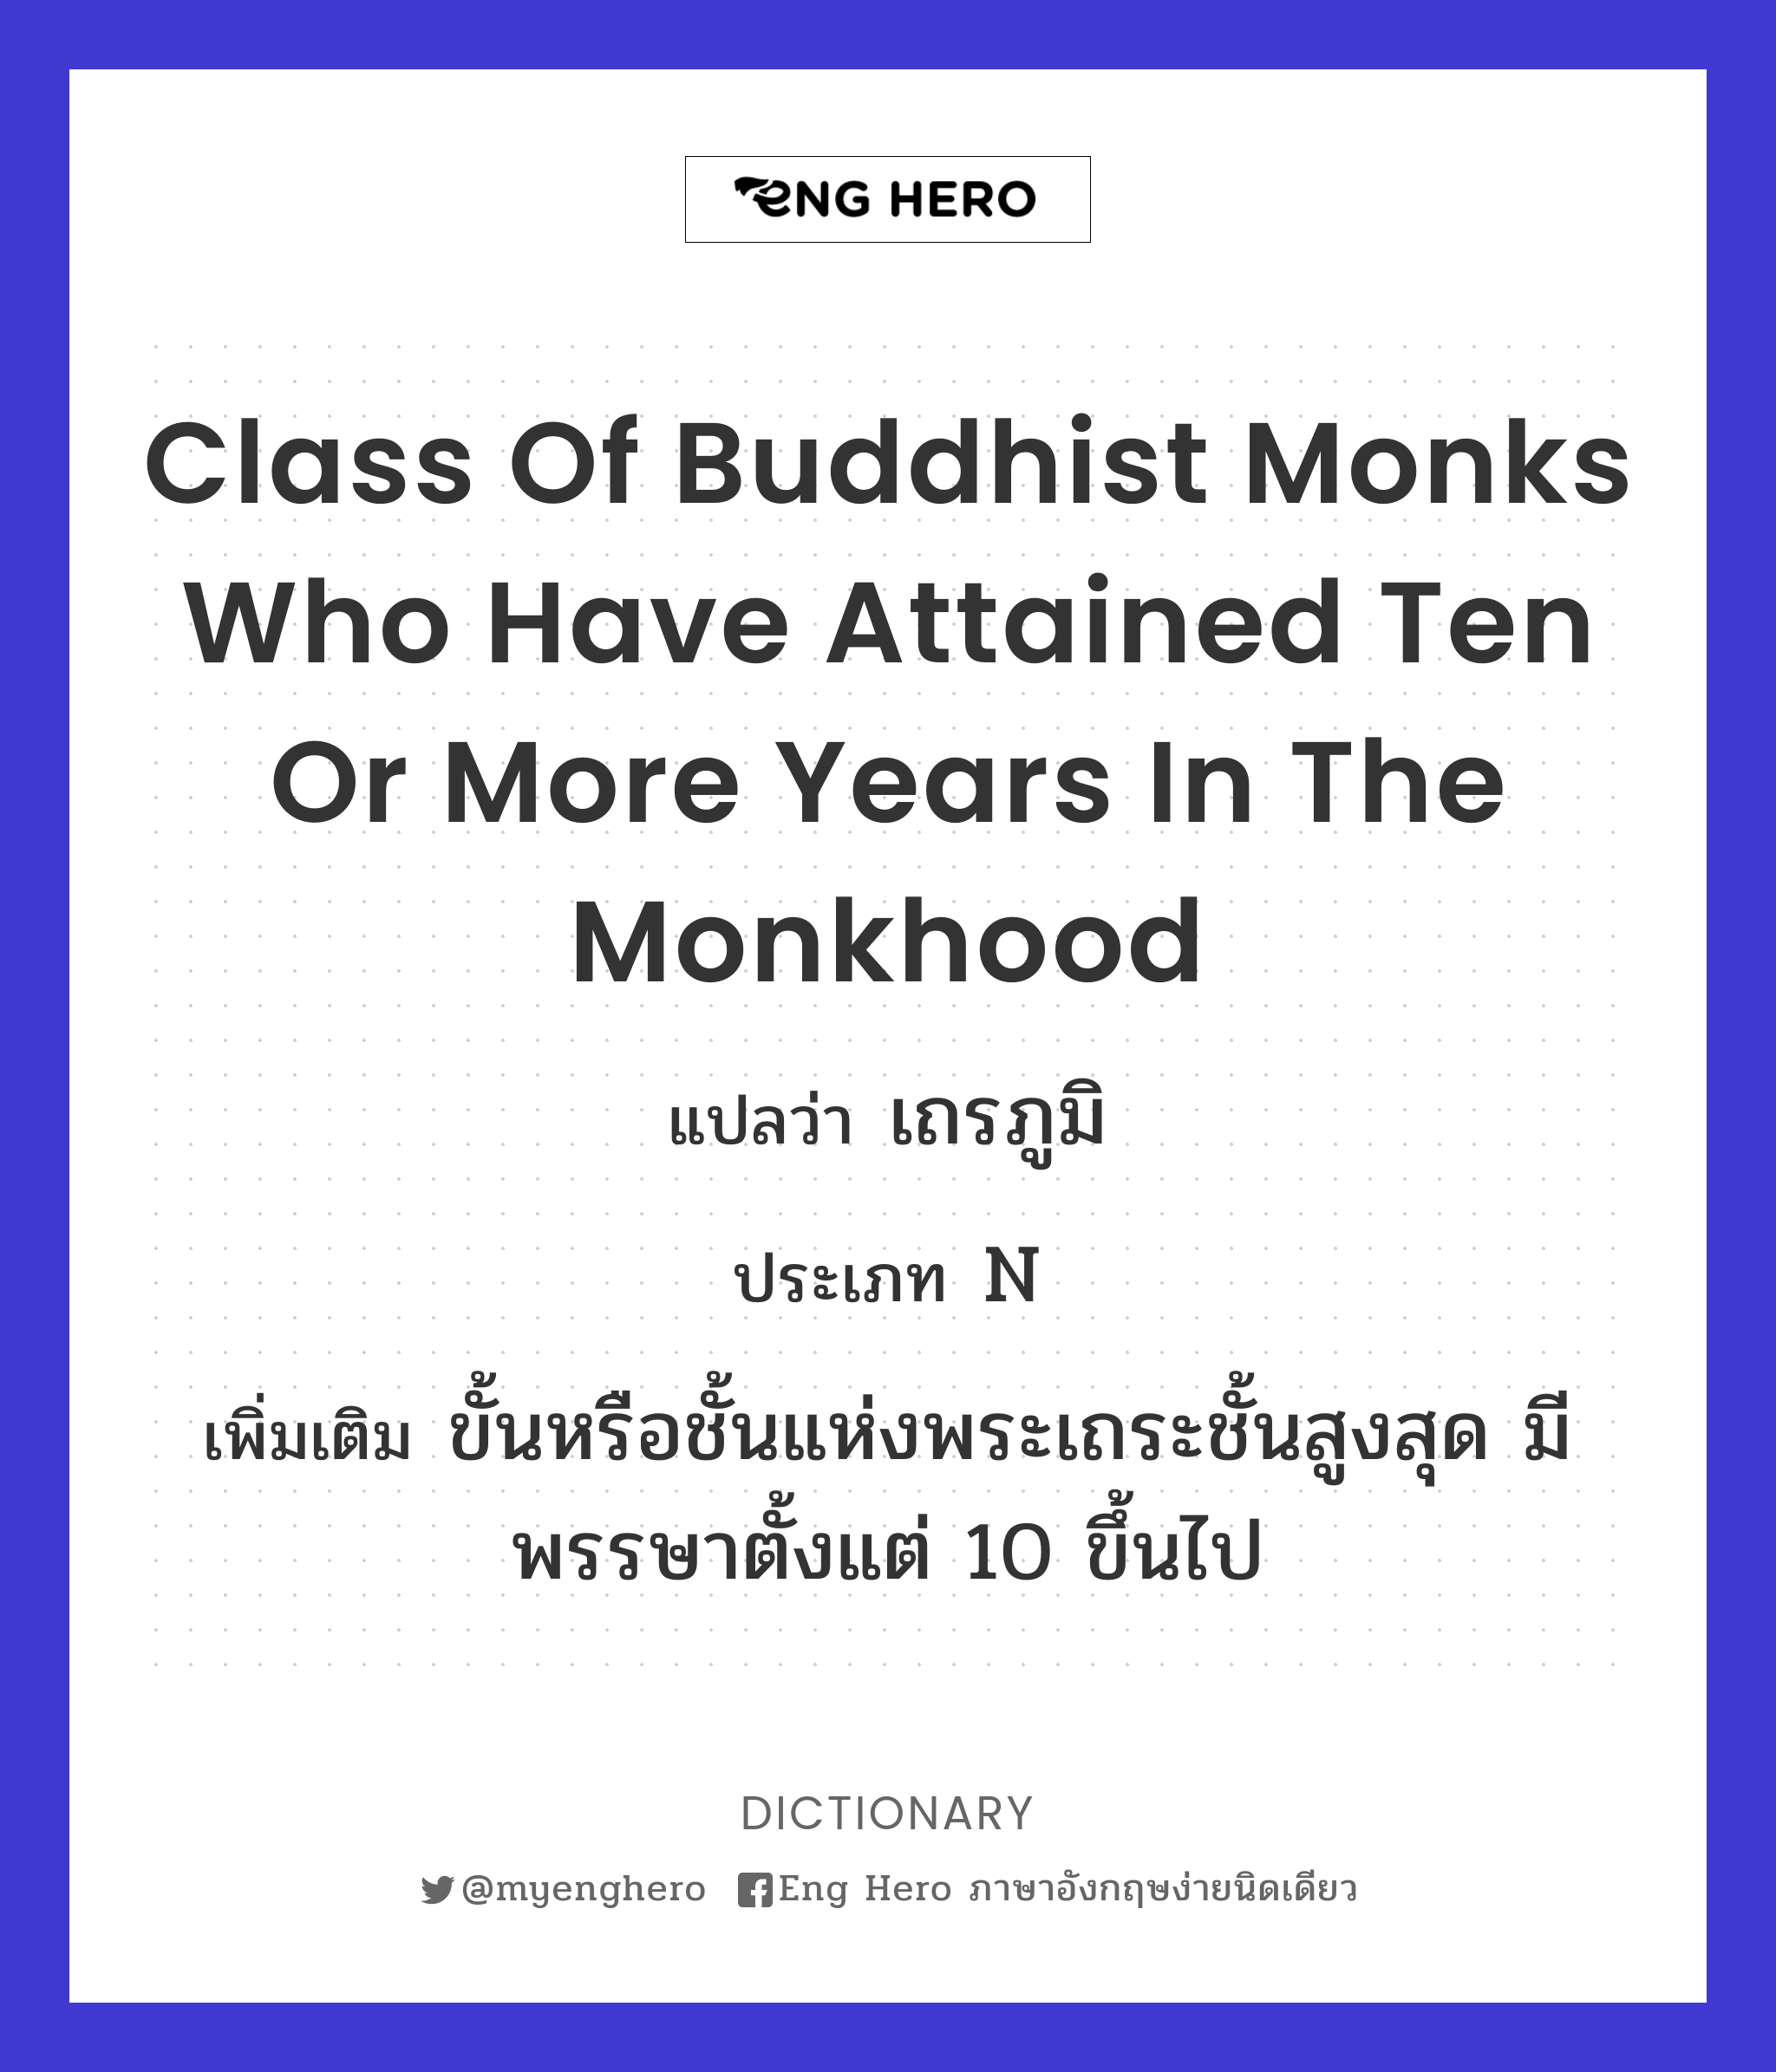 class of Buddhist monks who have attained ten or more years in the monkhood